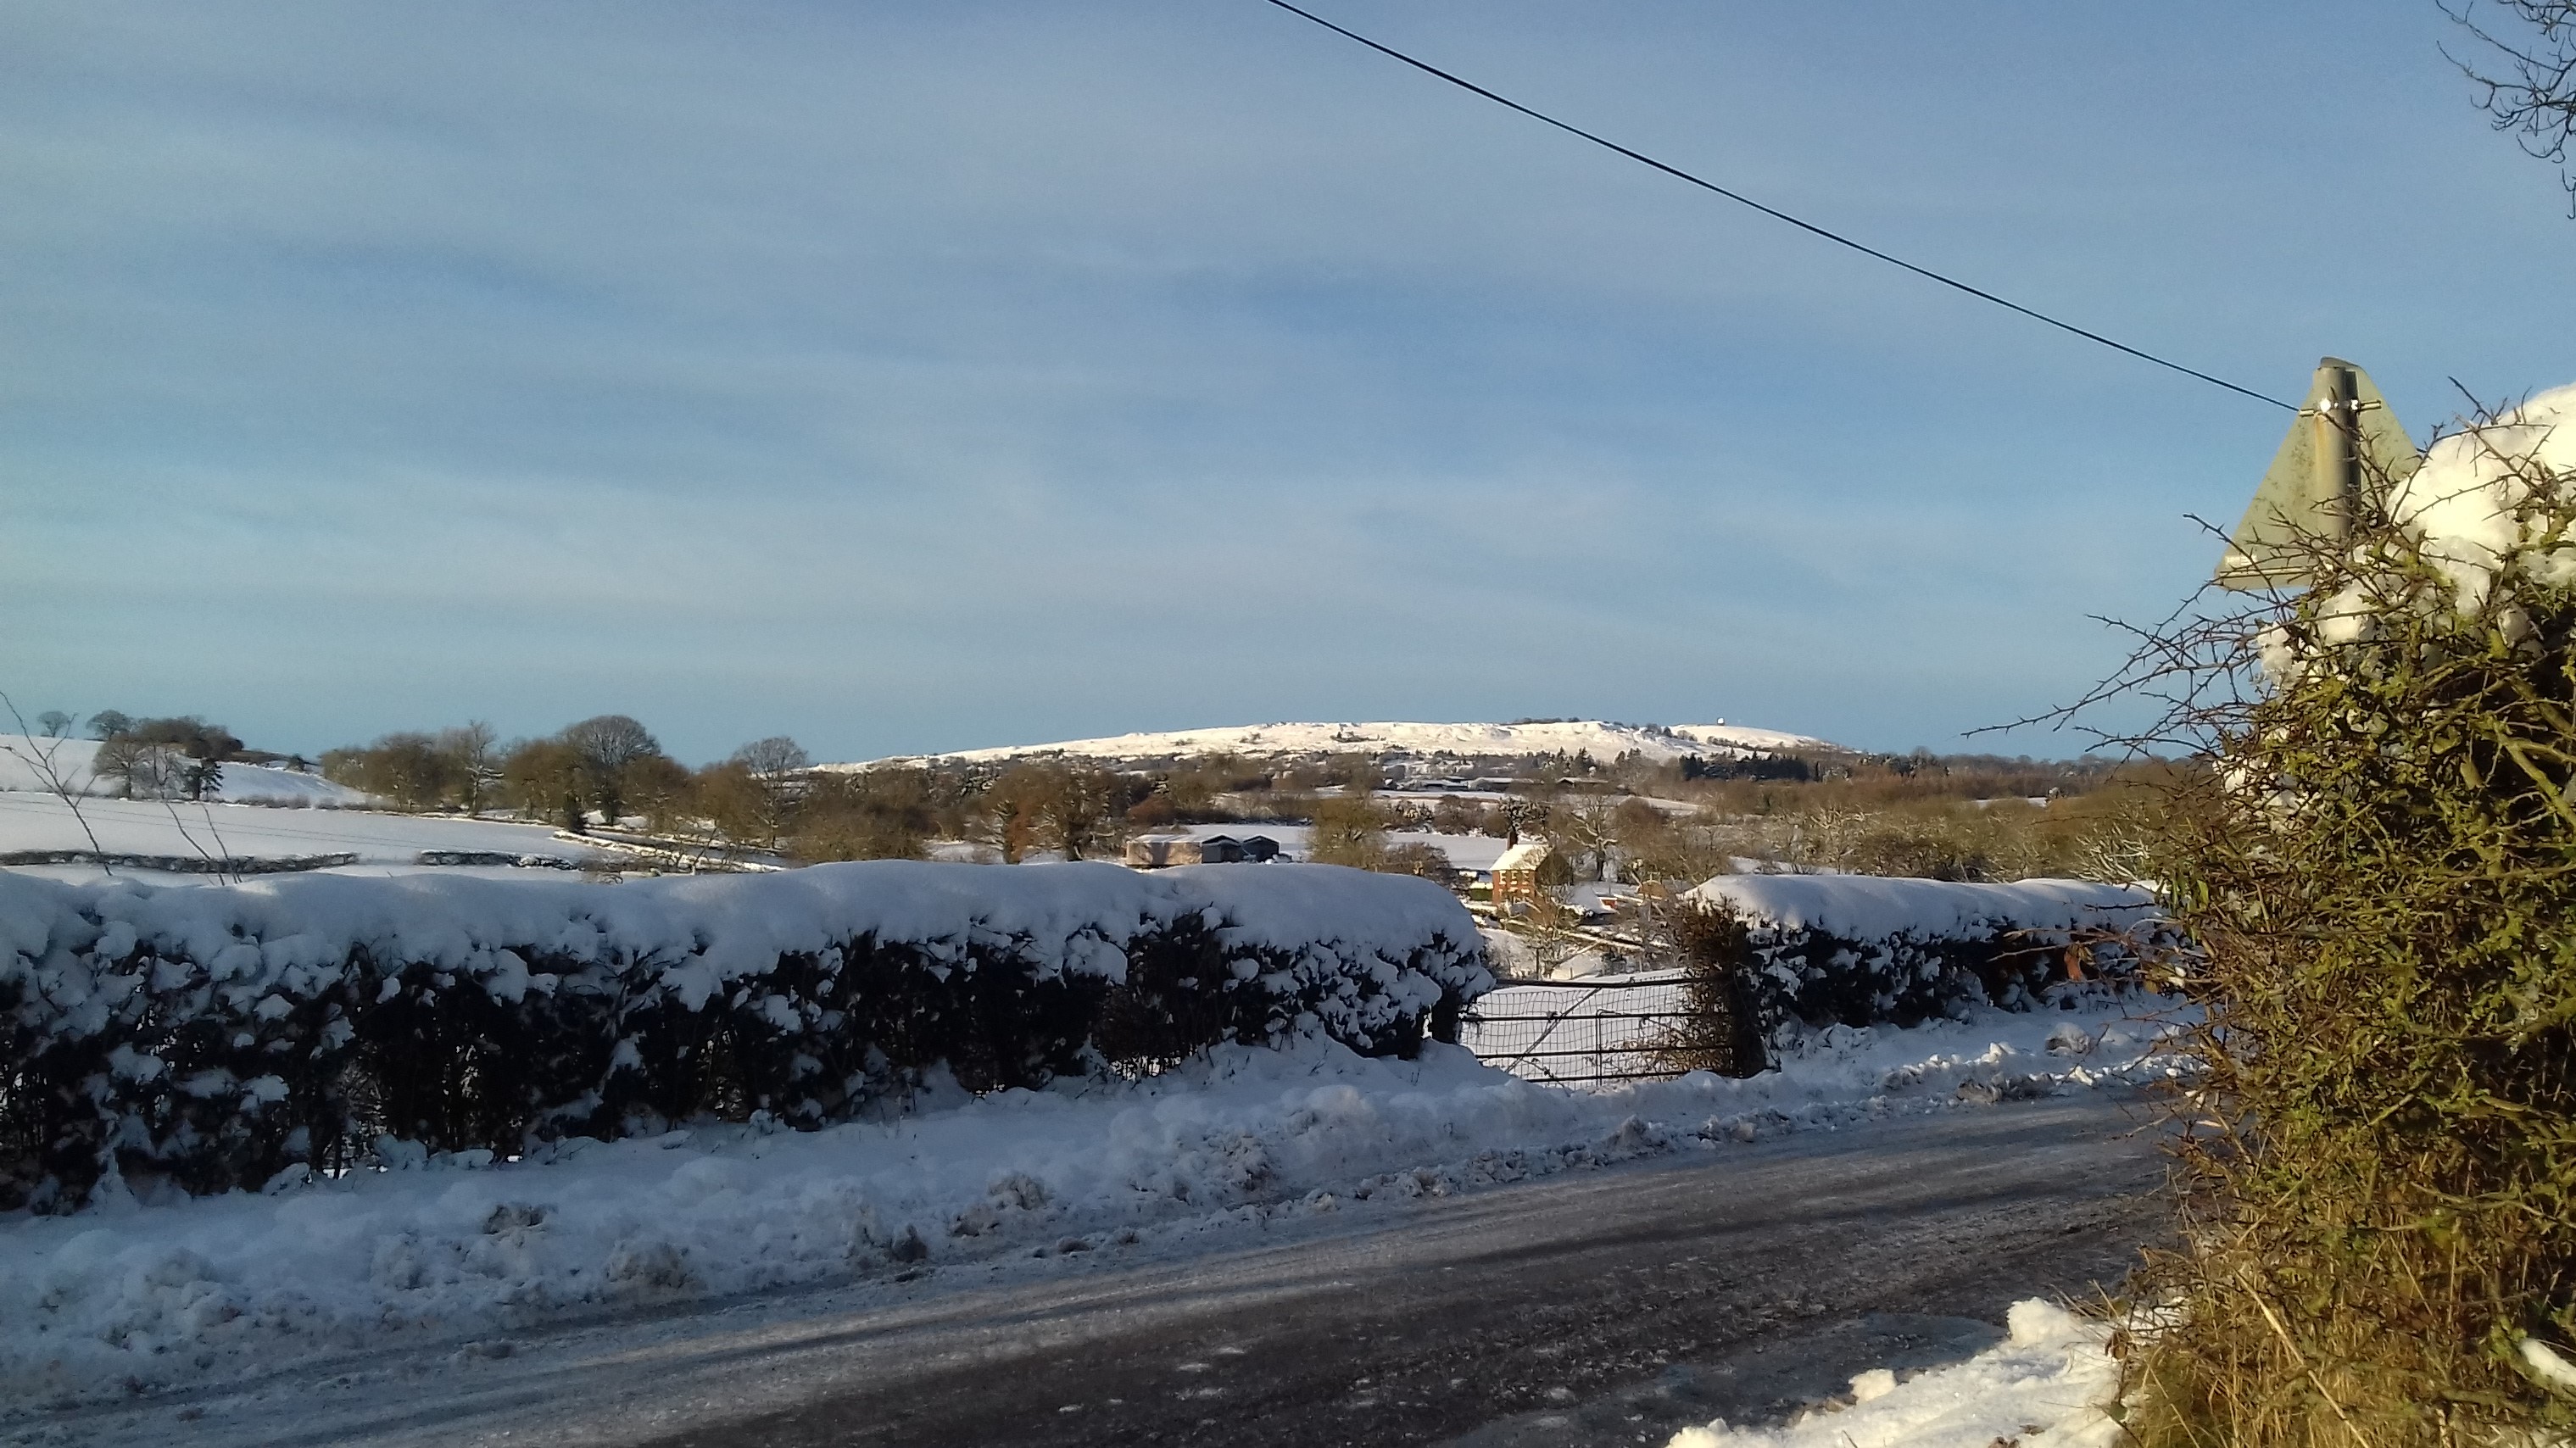 Titterstone Clee in the snow from our drive